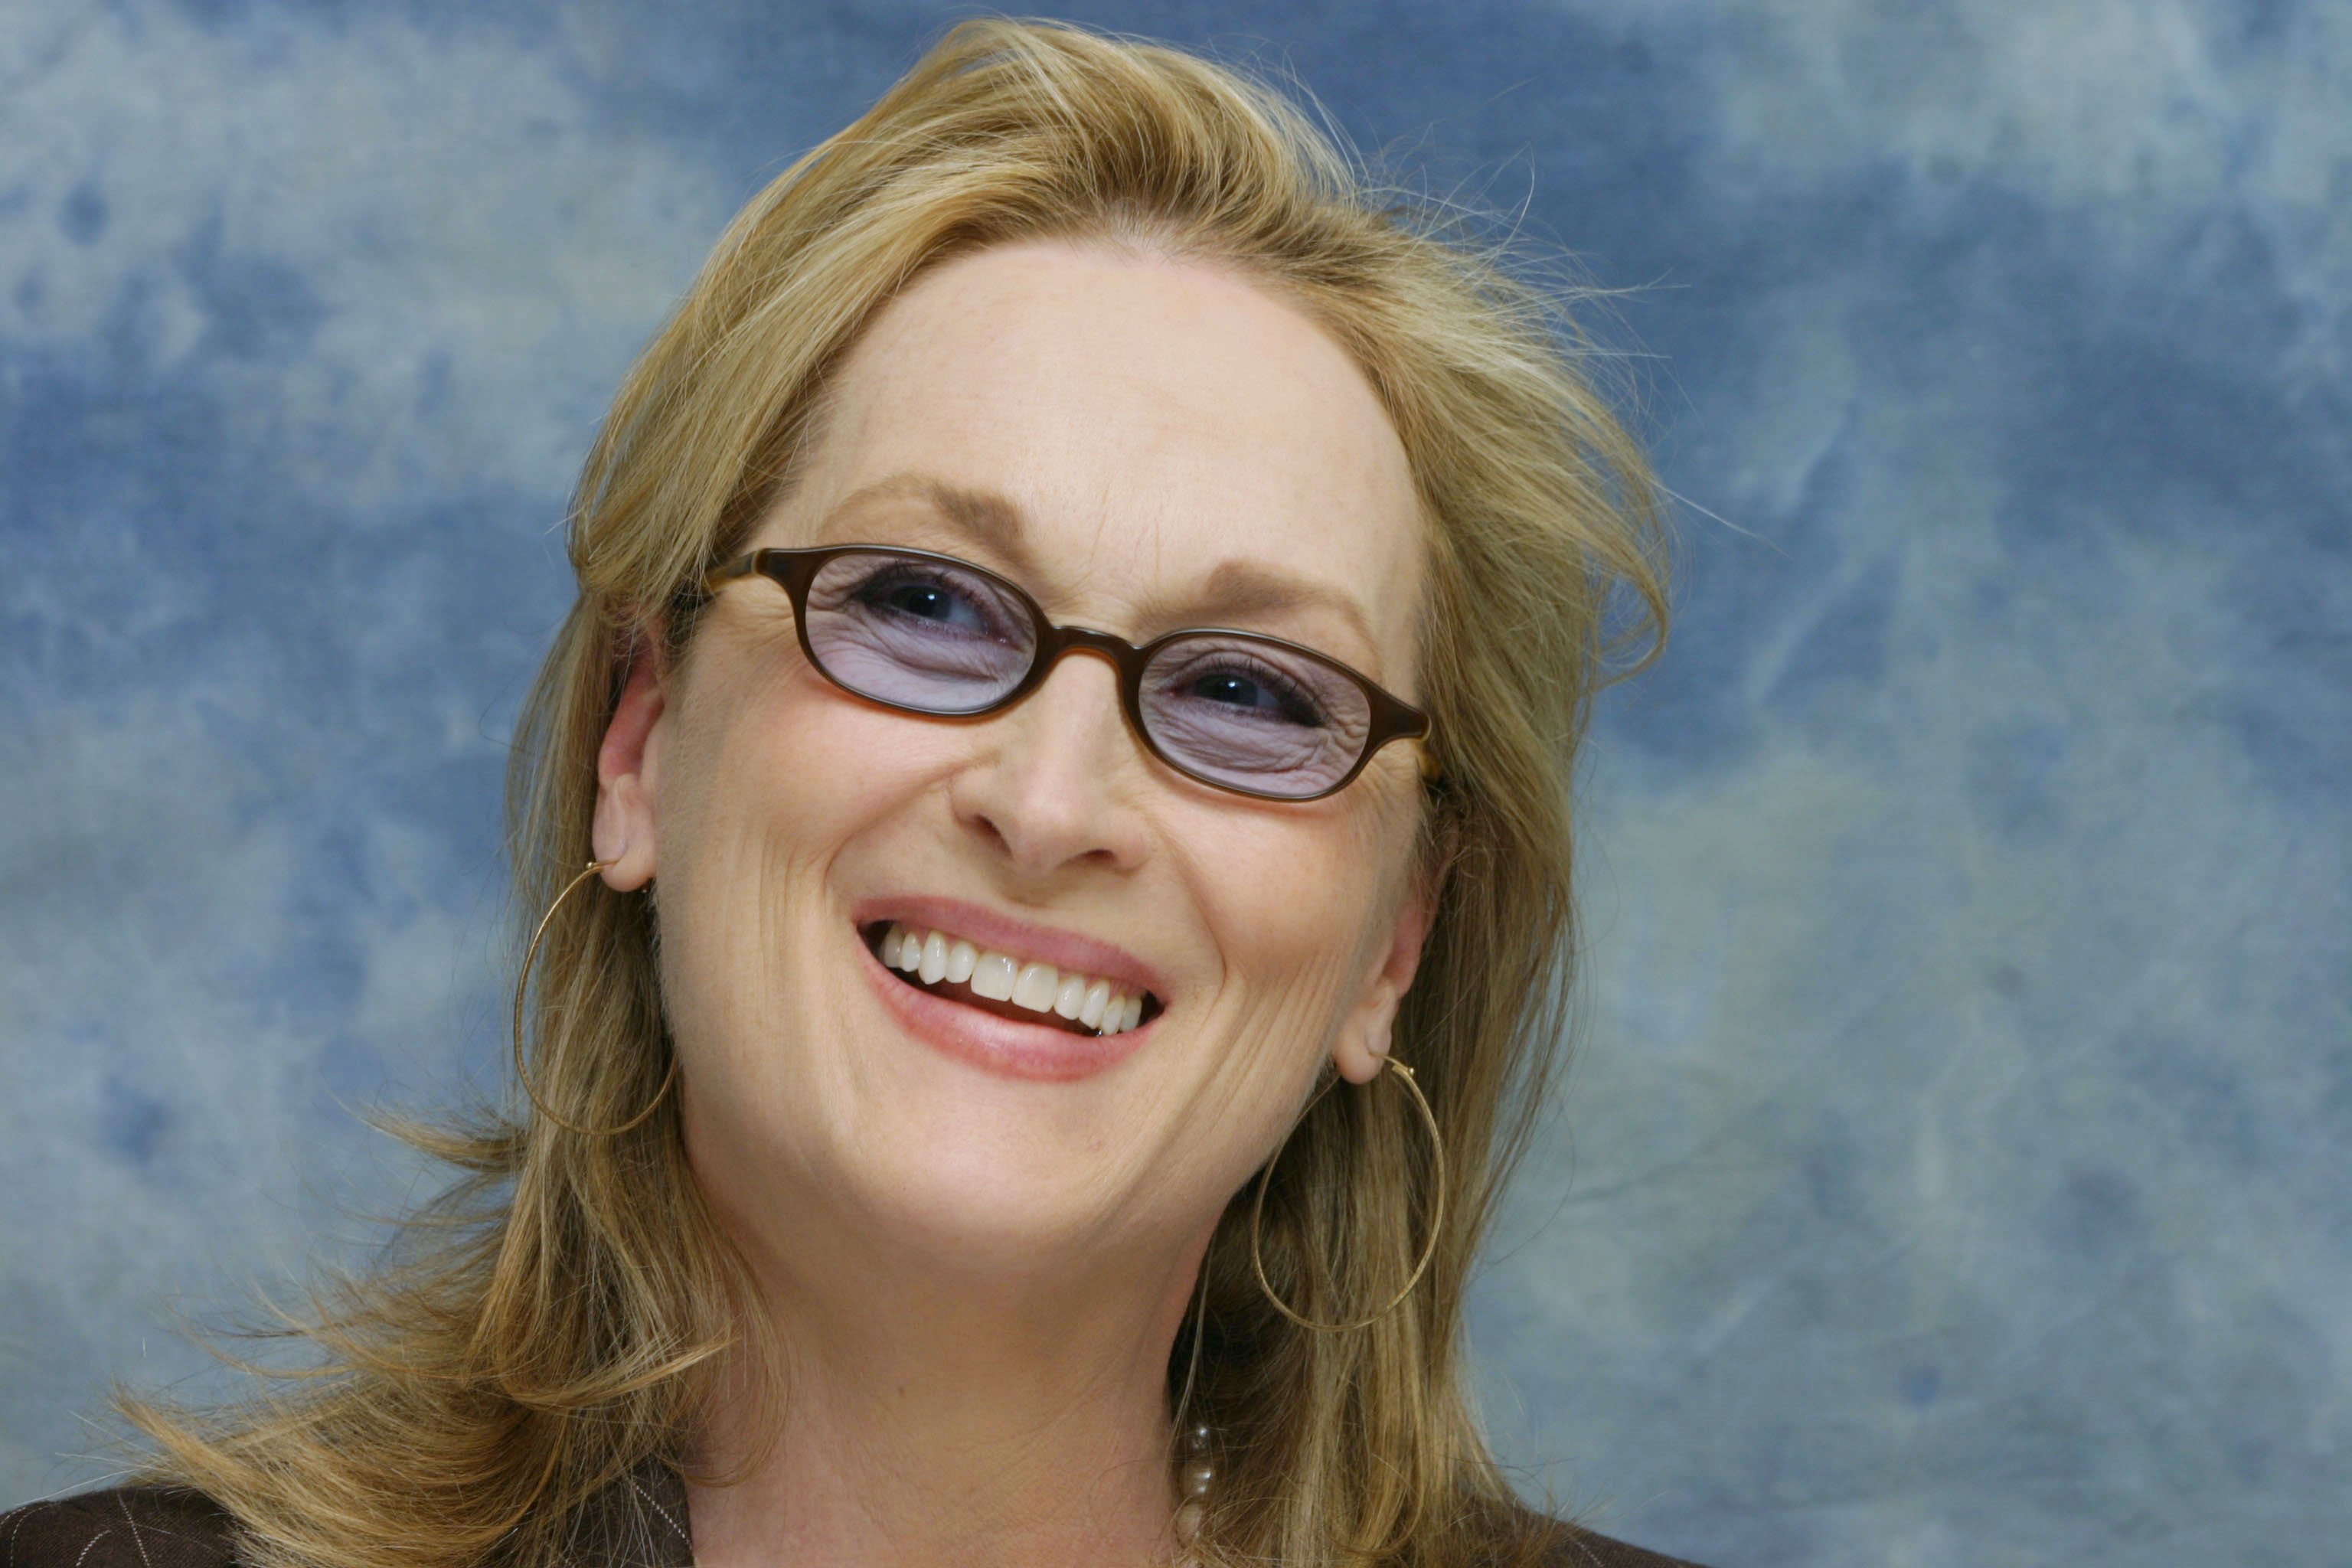 Meryl Streep, "the greatest actress of her generation." Photo: Getty Images/GlobalImagesUkraine